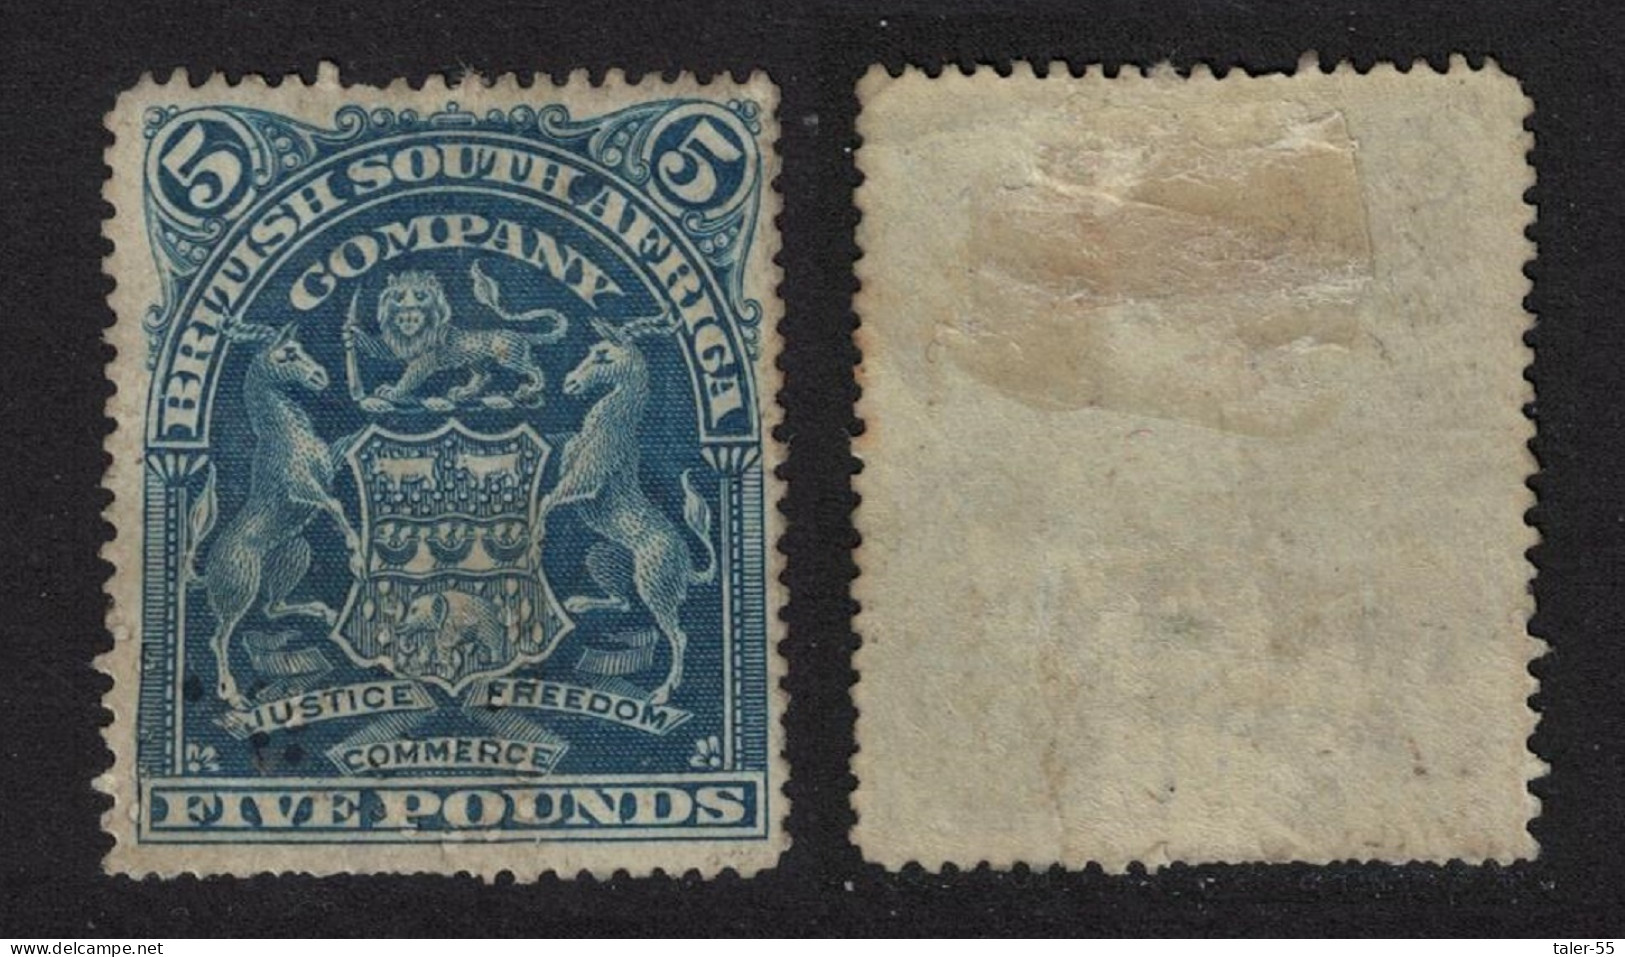 Rhodesia British South African Company 5 POUNDS RARR 1898 Canc SG#92 - Rodesia (1964-1980)